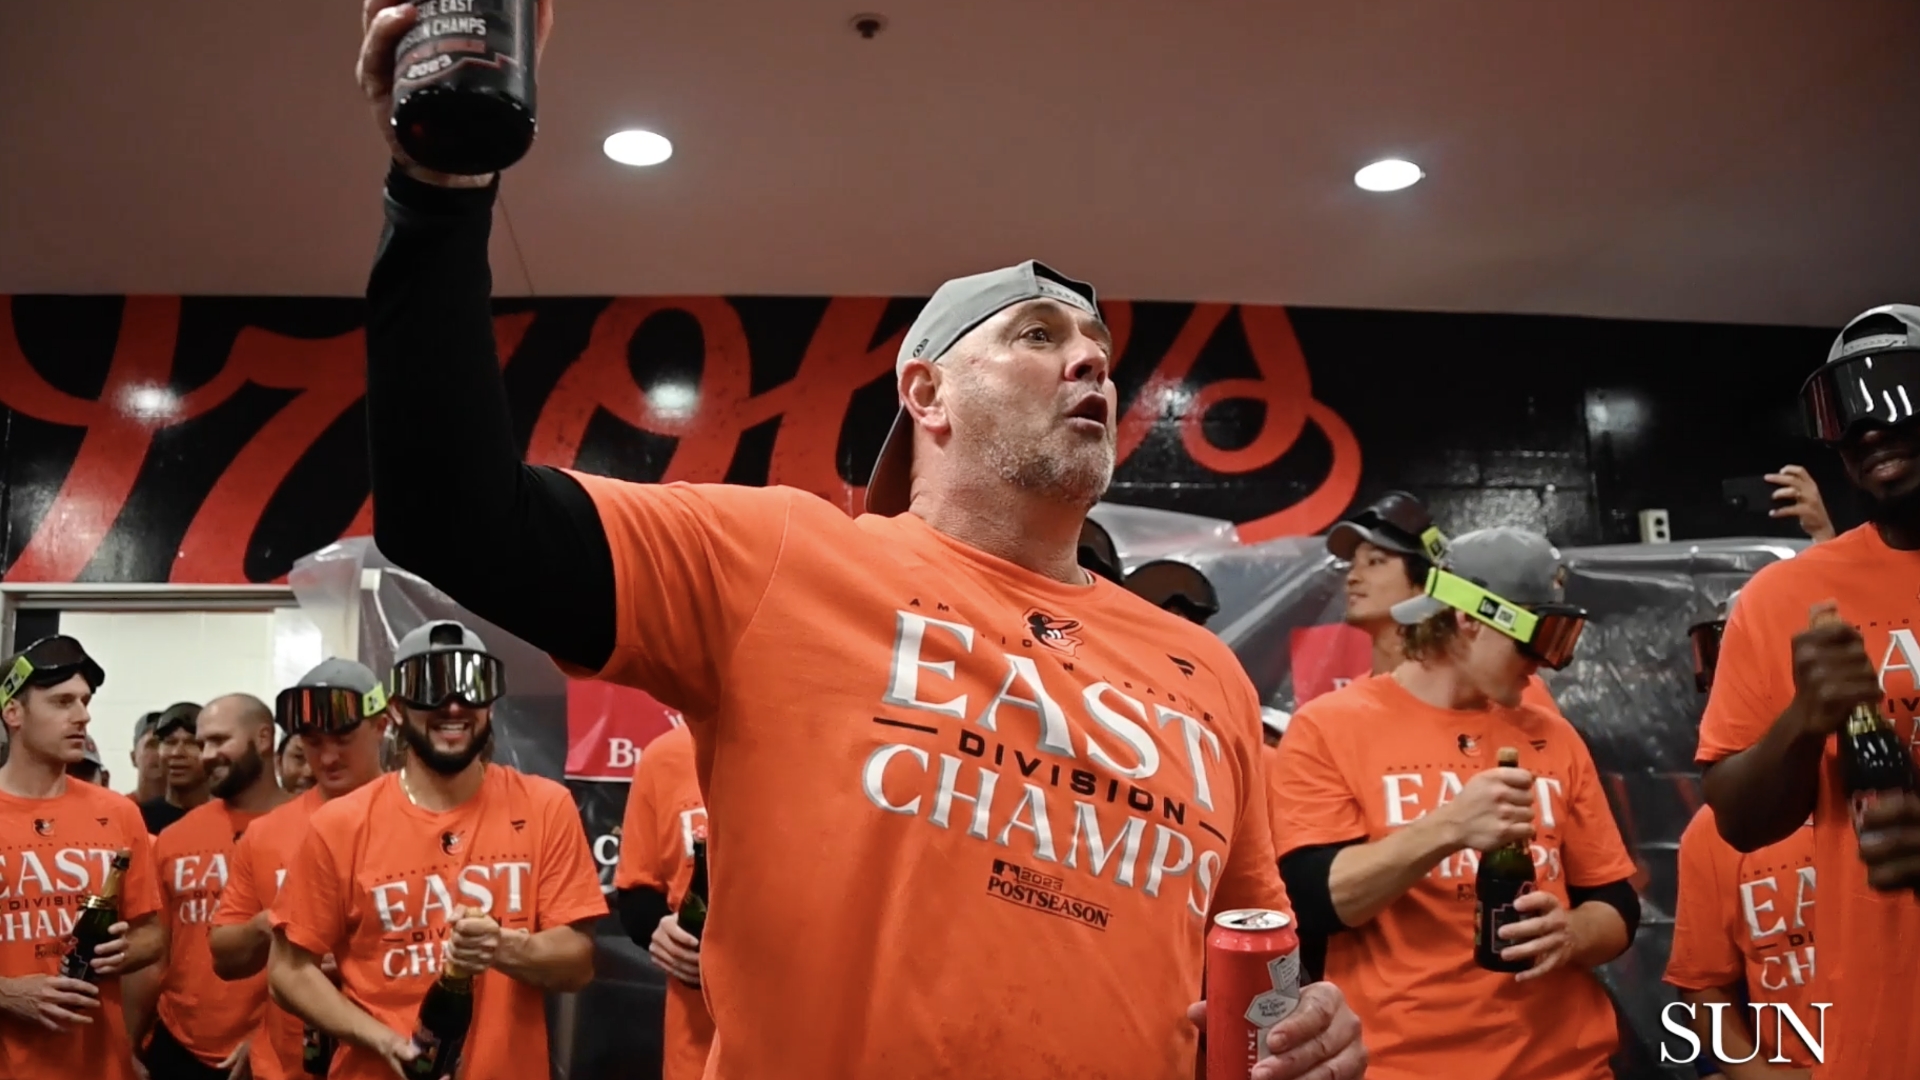 Orioles embrace new chaotic slogan amidst playoff race - Camden Chat